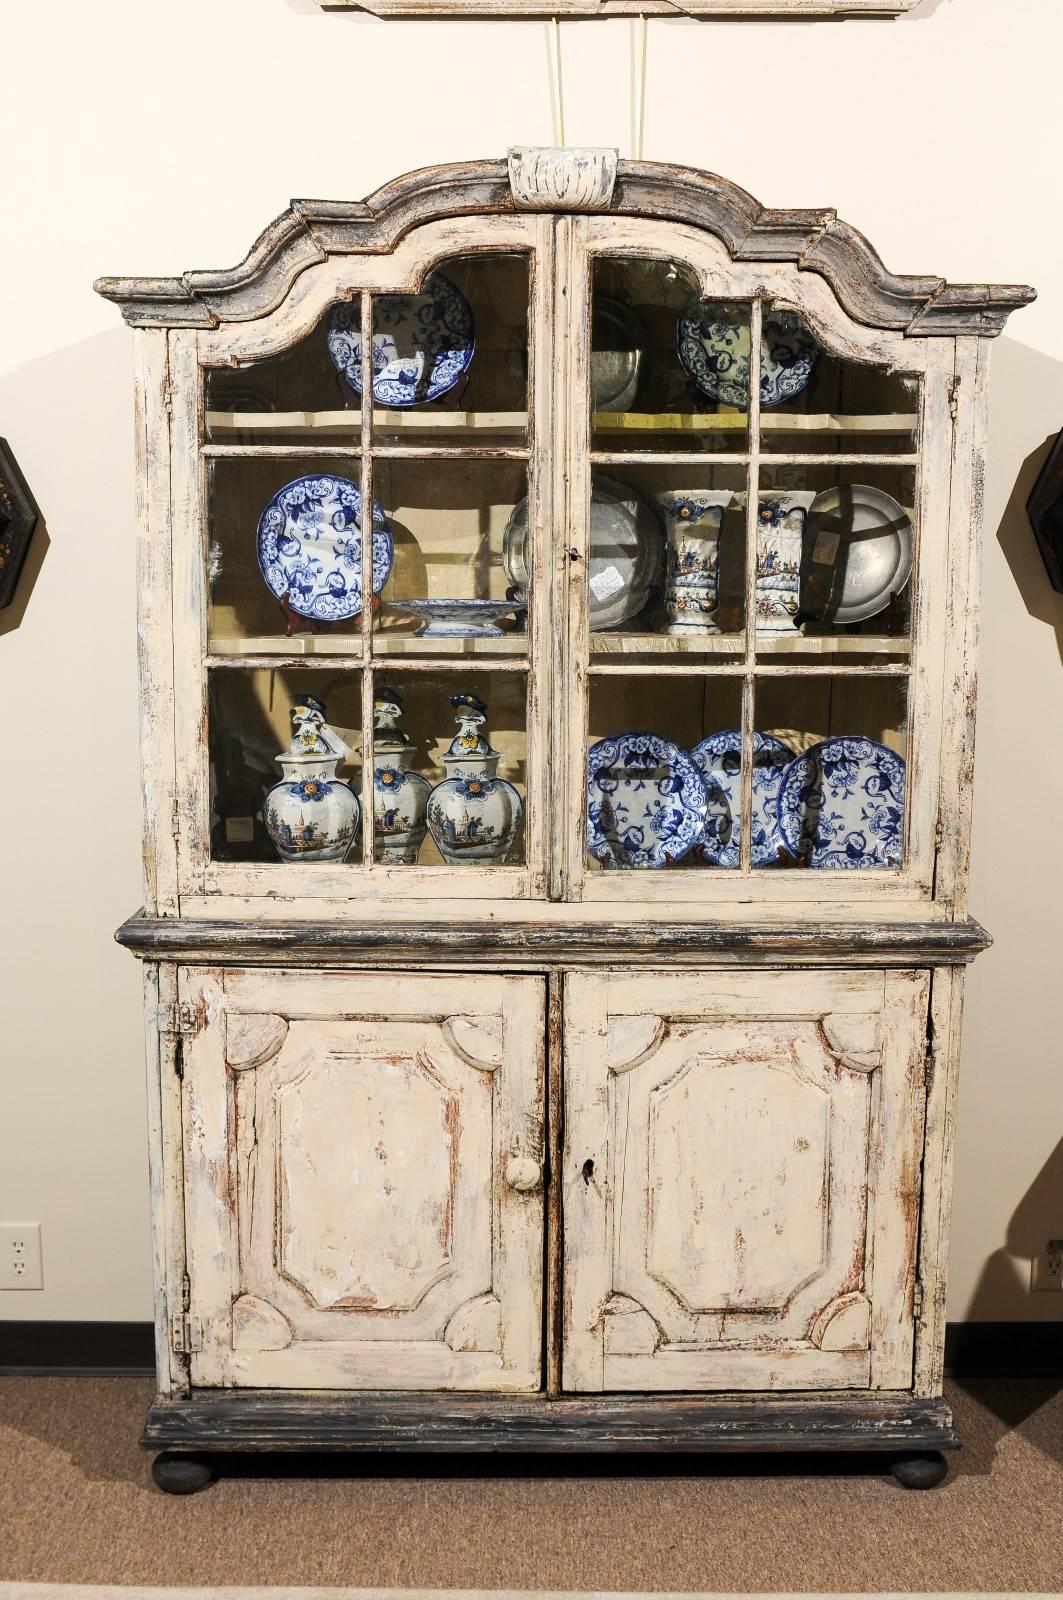 18th century Dutch buffet deux corps in a painted finish, circa 1780.
A rustic piece with lots of charm, this buffet deux corps is a typical style of the Dutch craftsman. The cornice, bun feet and the panel doors make the design interesting. The